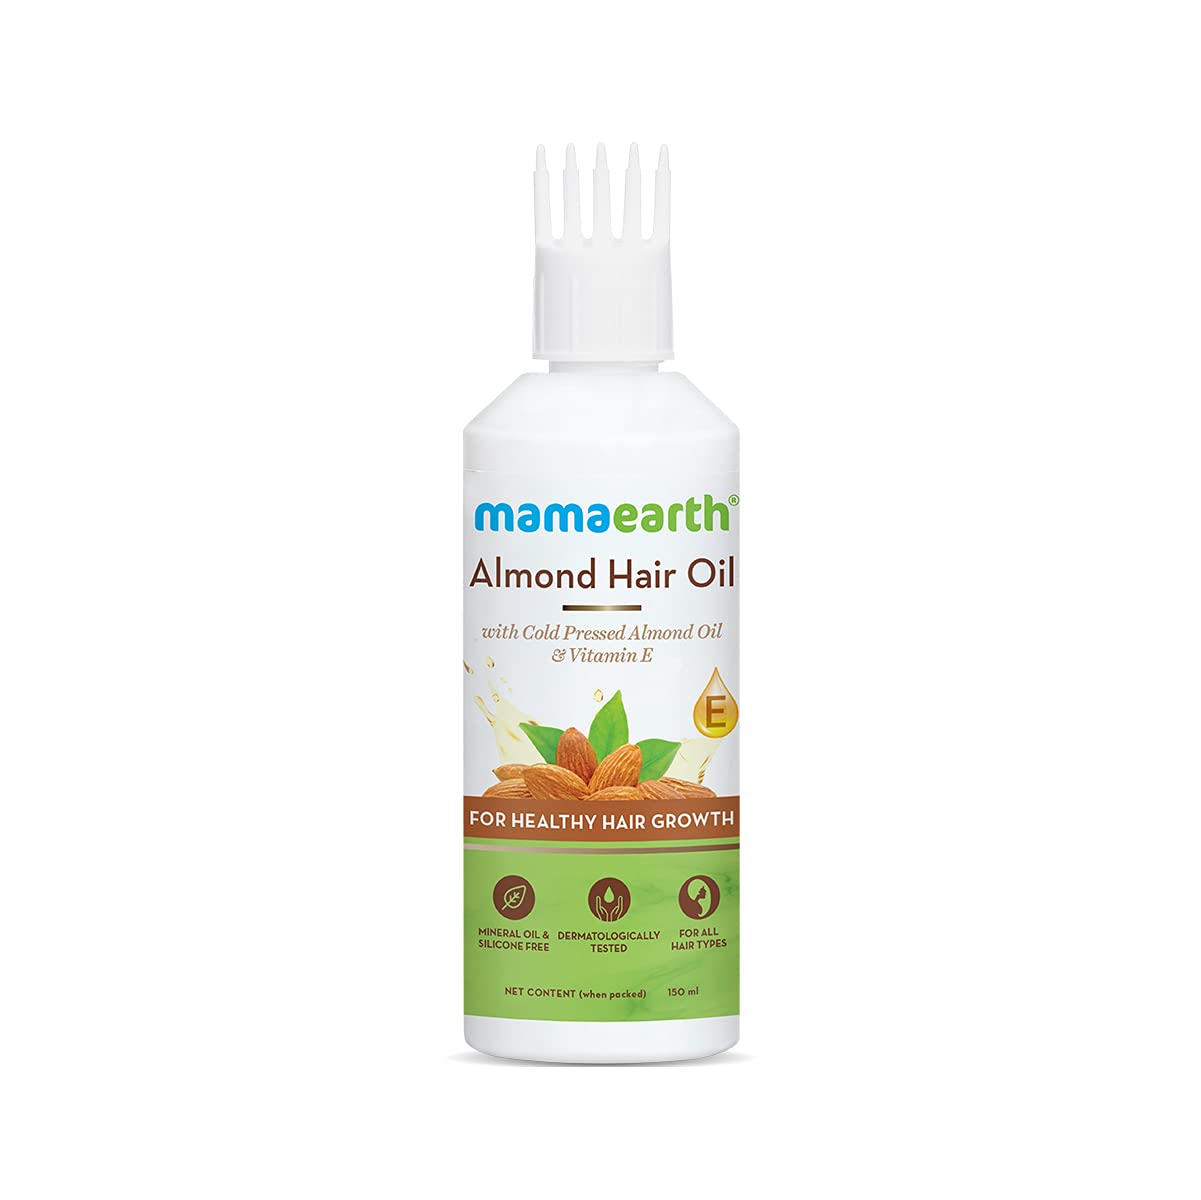 Mamaearth Almond Hair Oil for healthy hair growth and deep nourishment, with Cold Pressed Almond Oil & Vitamin E for Healthy Hair Growth - 150 ml